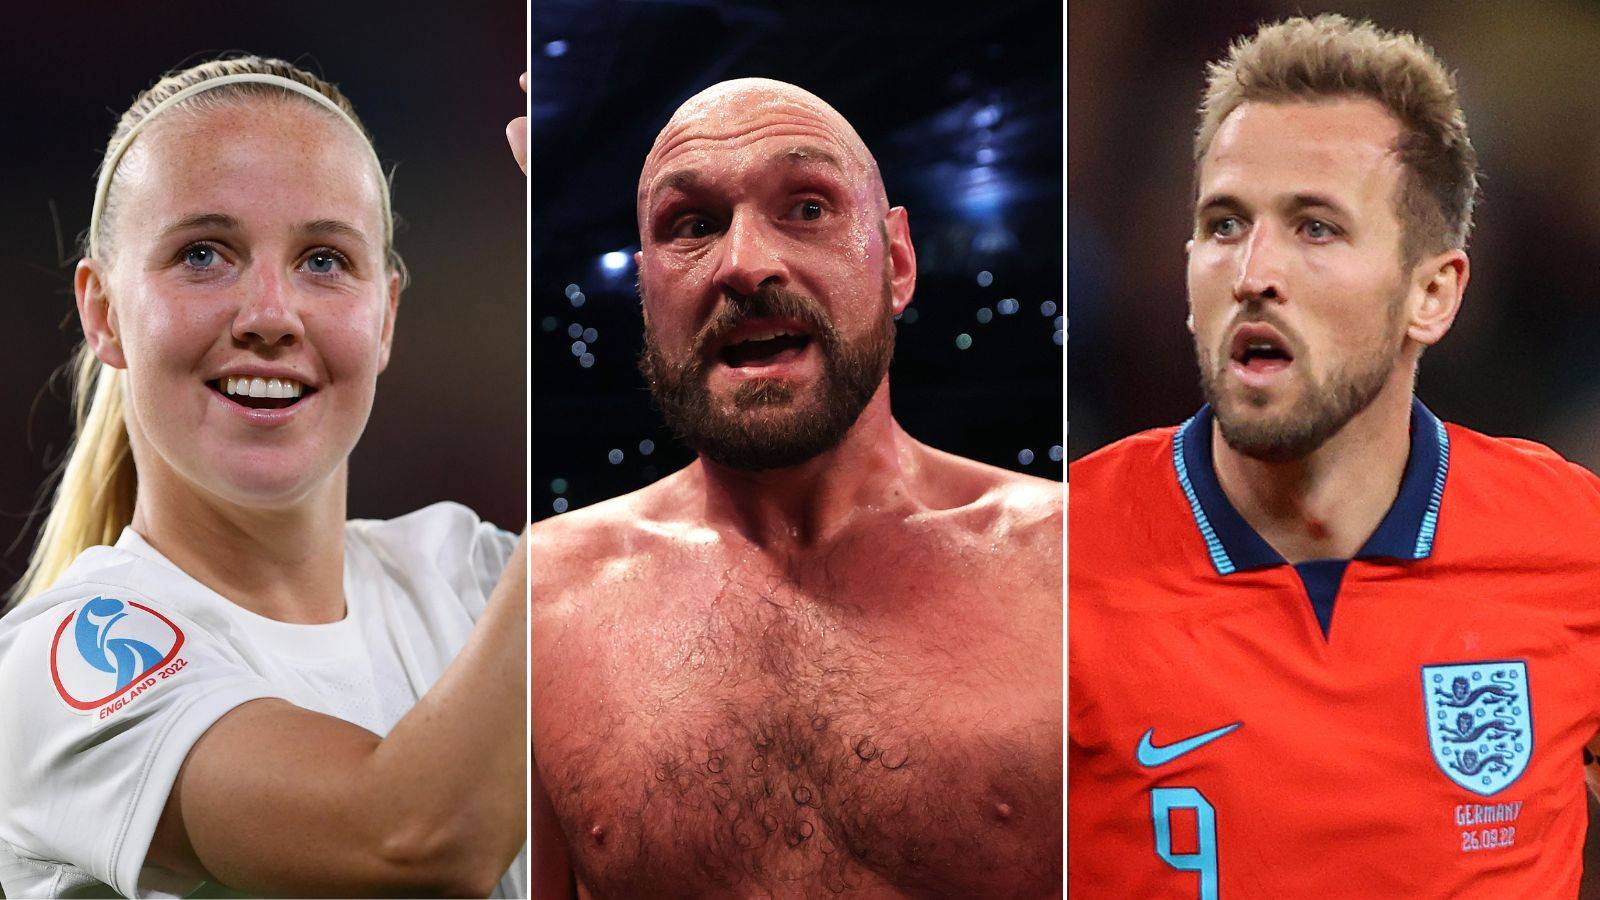 Sports Personality of the Year contenders